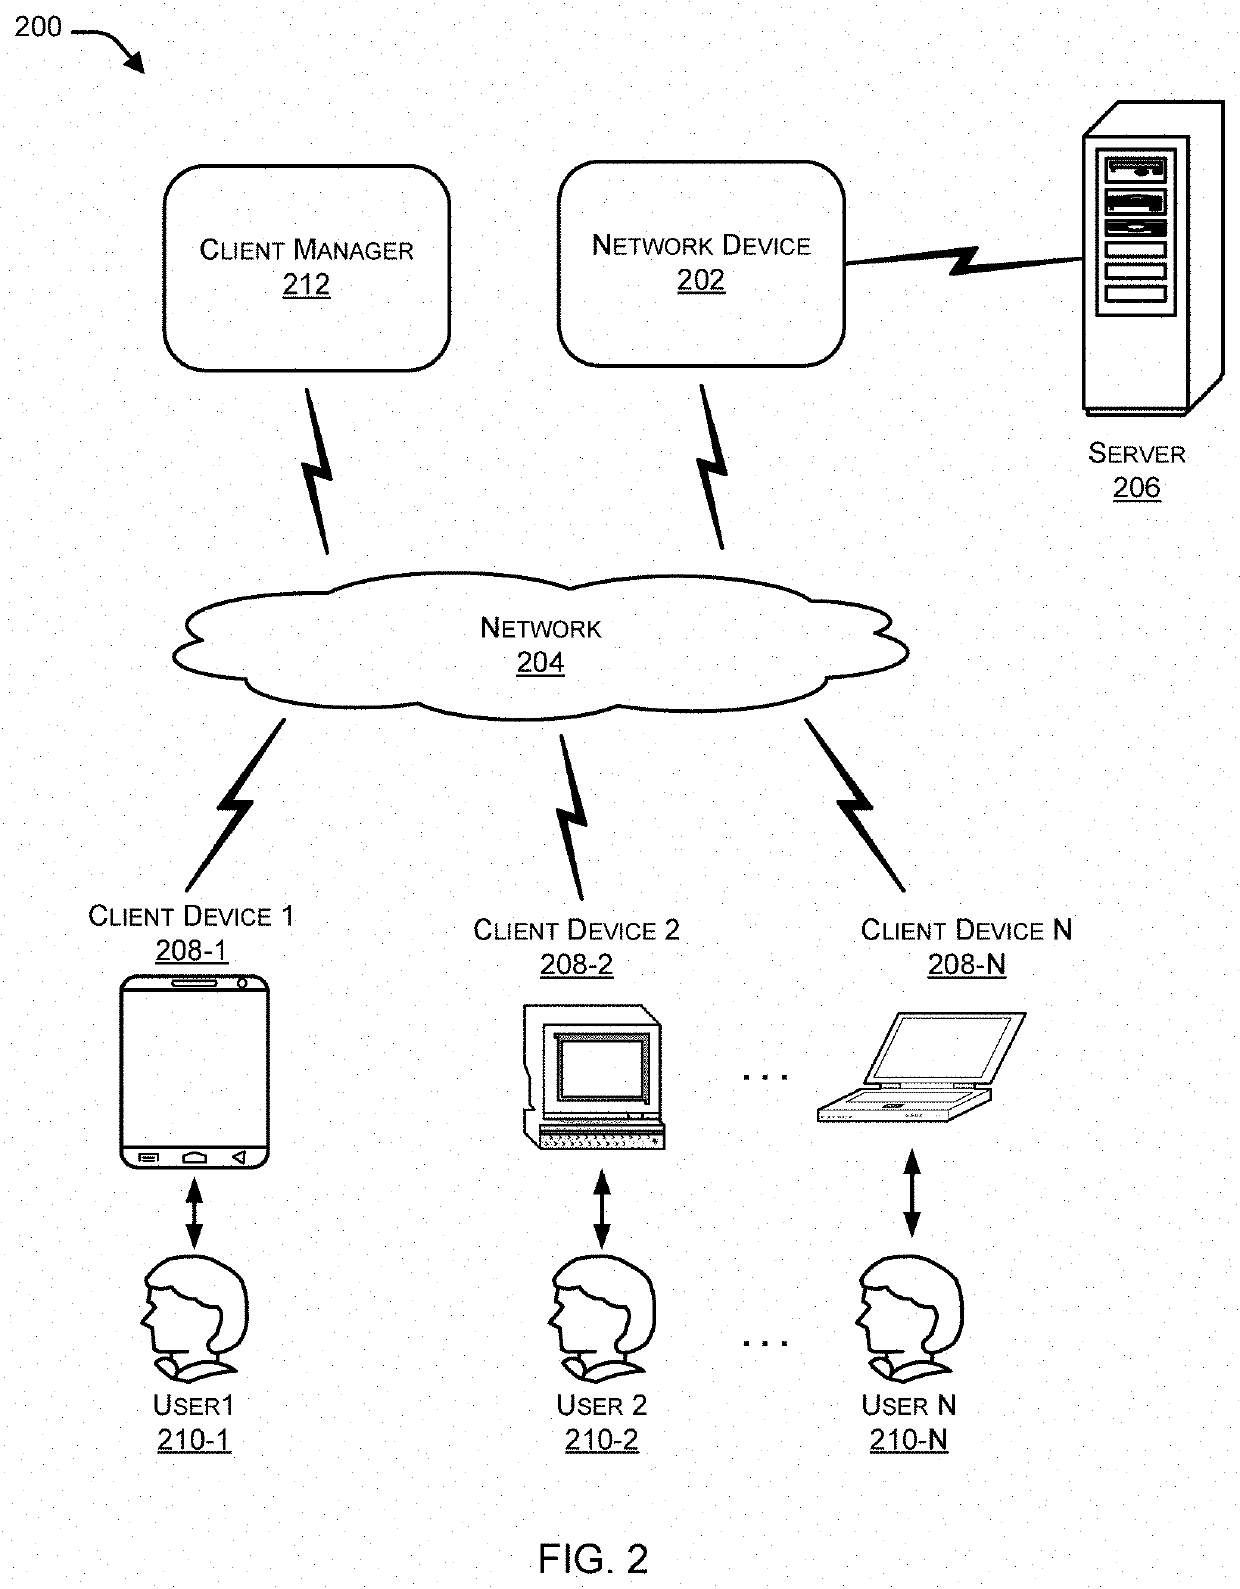 Determining on-net/off-net status of a client device